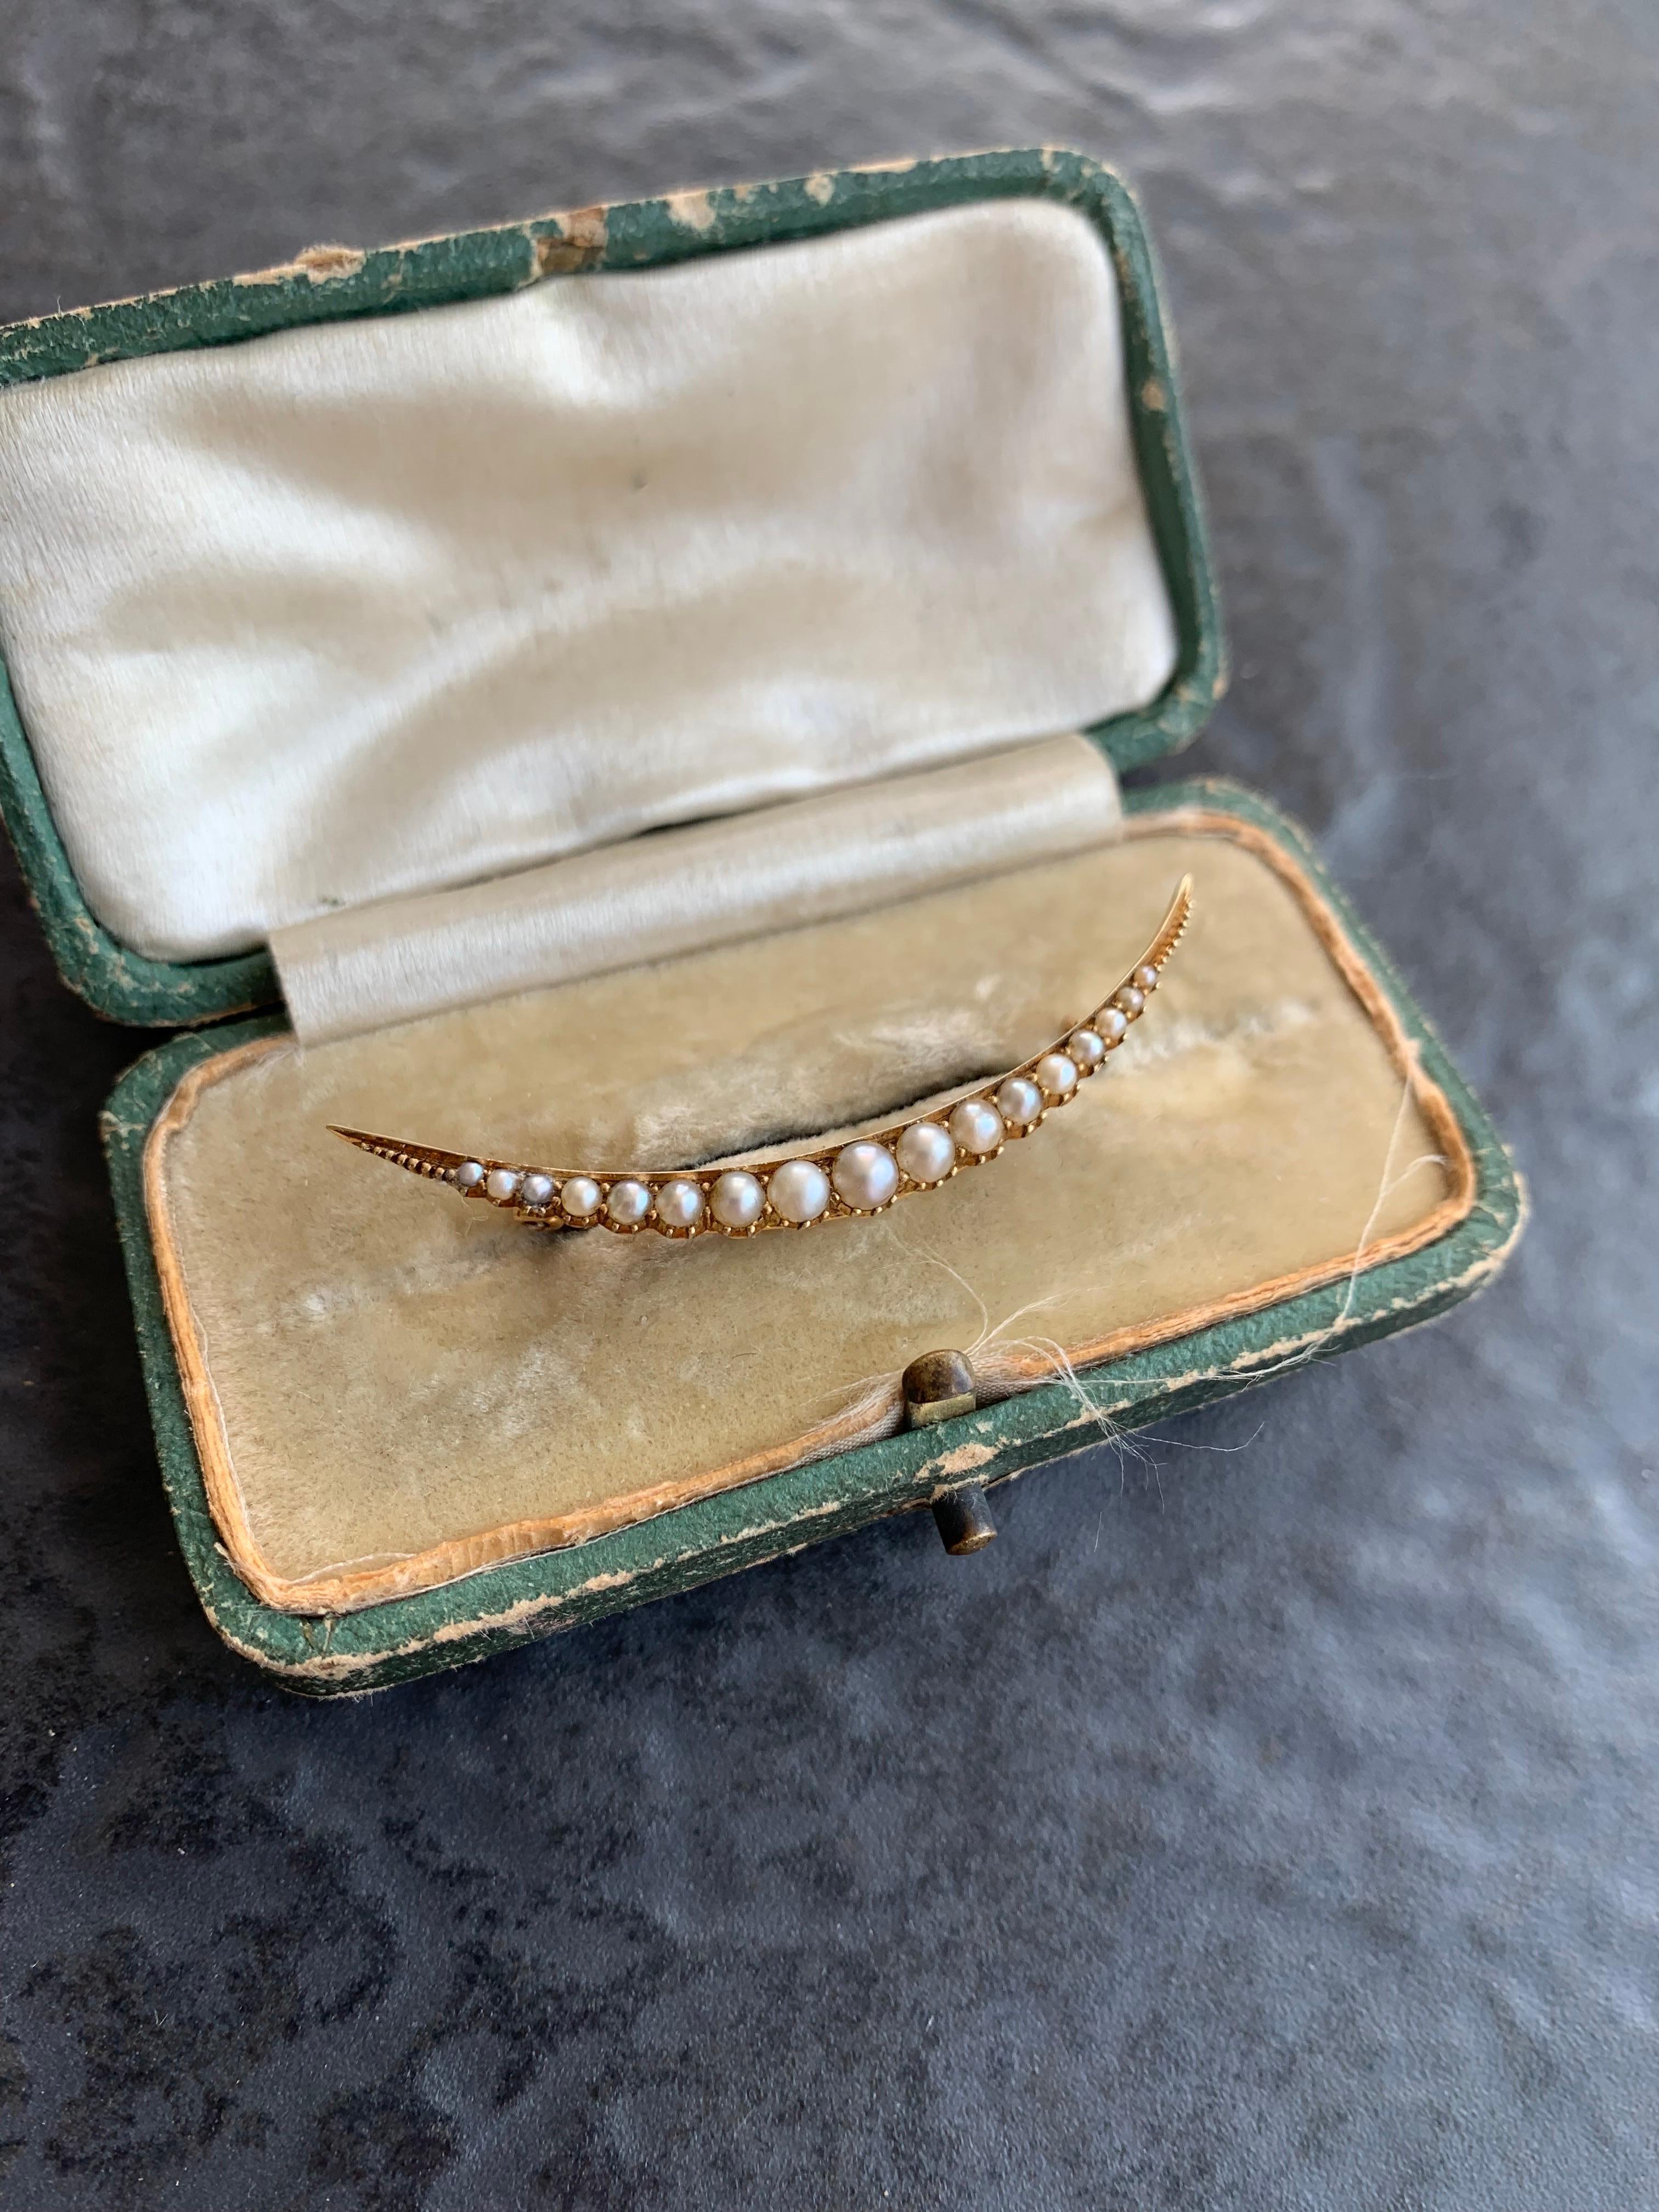 Stunning crescent brooch adorned with plump pearls set in a buttery 15ct yellow gold.

-Weight: 2.42g
-Measurements: Length 47mm, Widest point 2.7mm, Depth 4.5mm
-Materials: 15ct yellow gold
-Hallmarks: 15ct stamp
-Condition: Good Overall - please